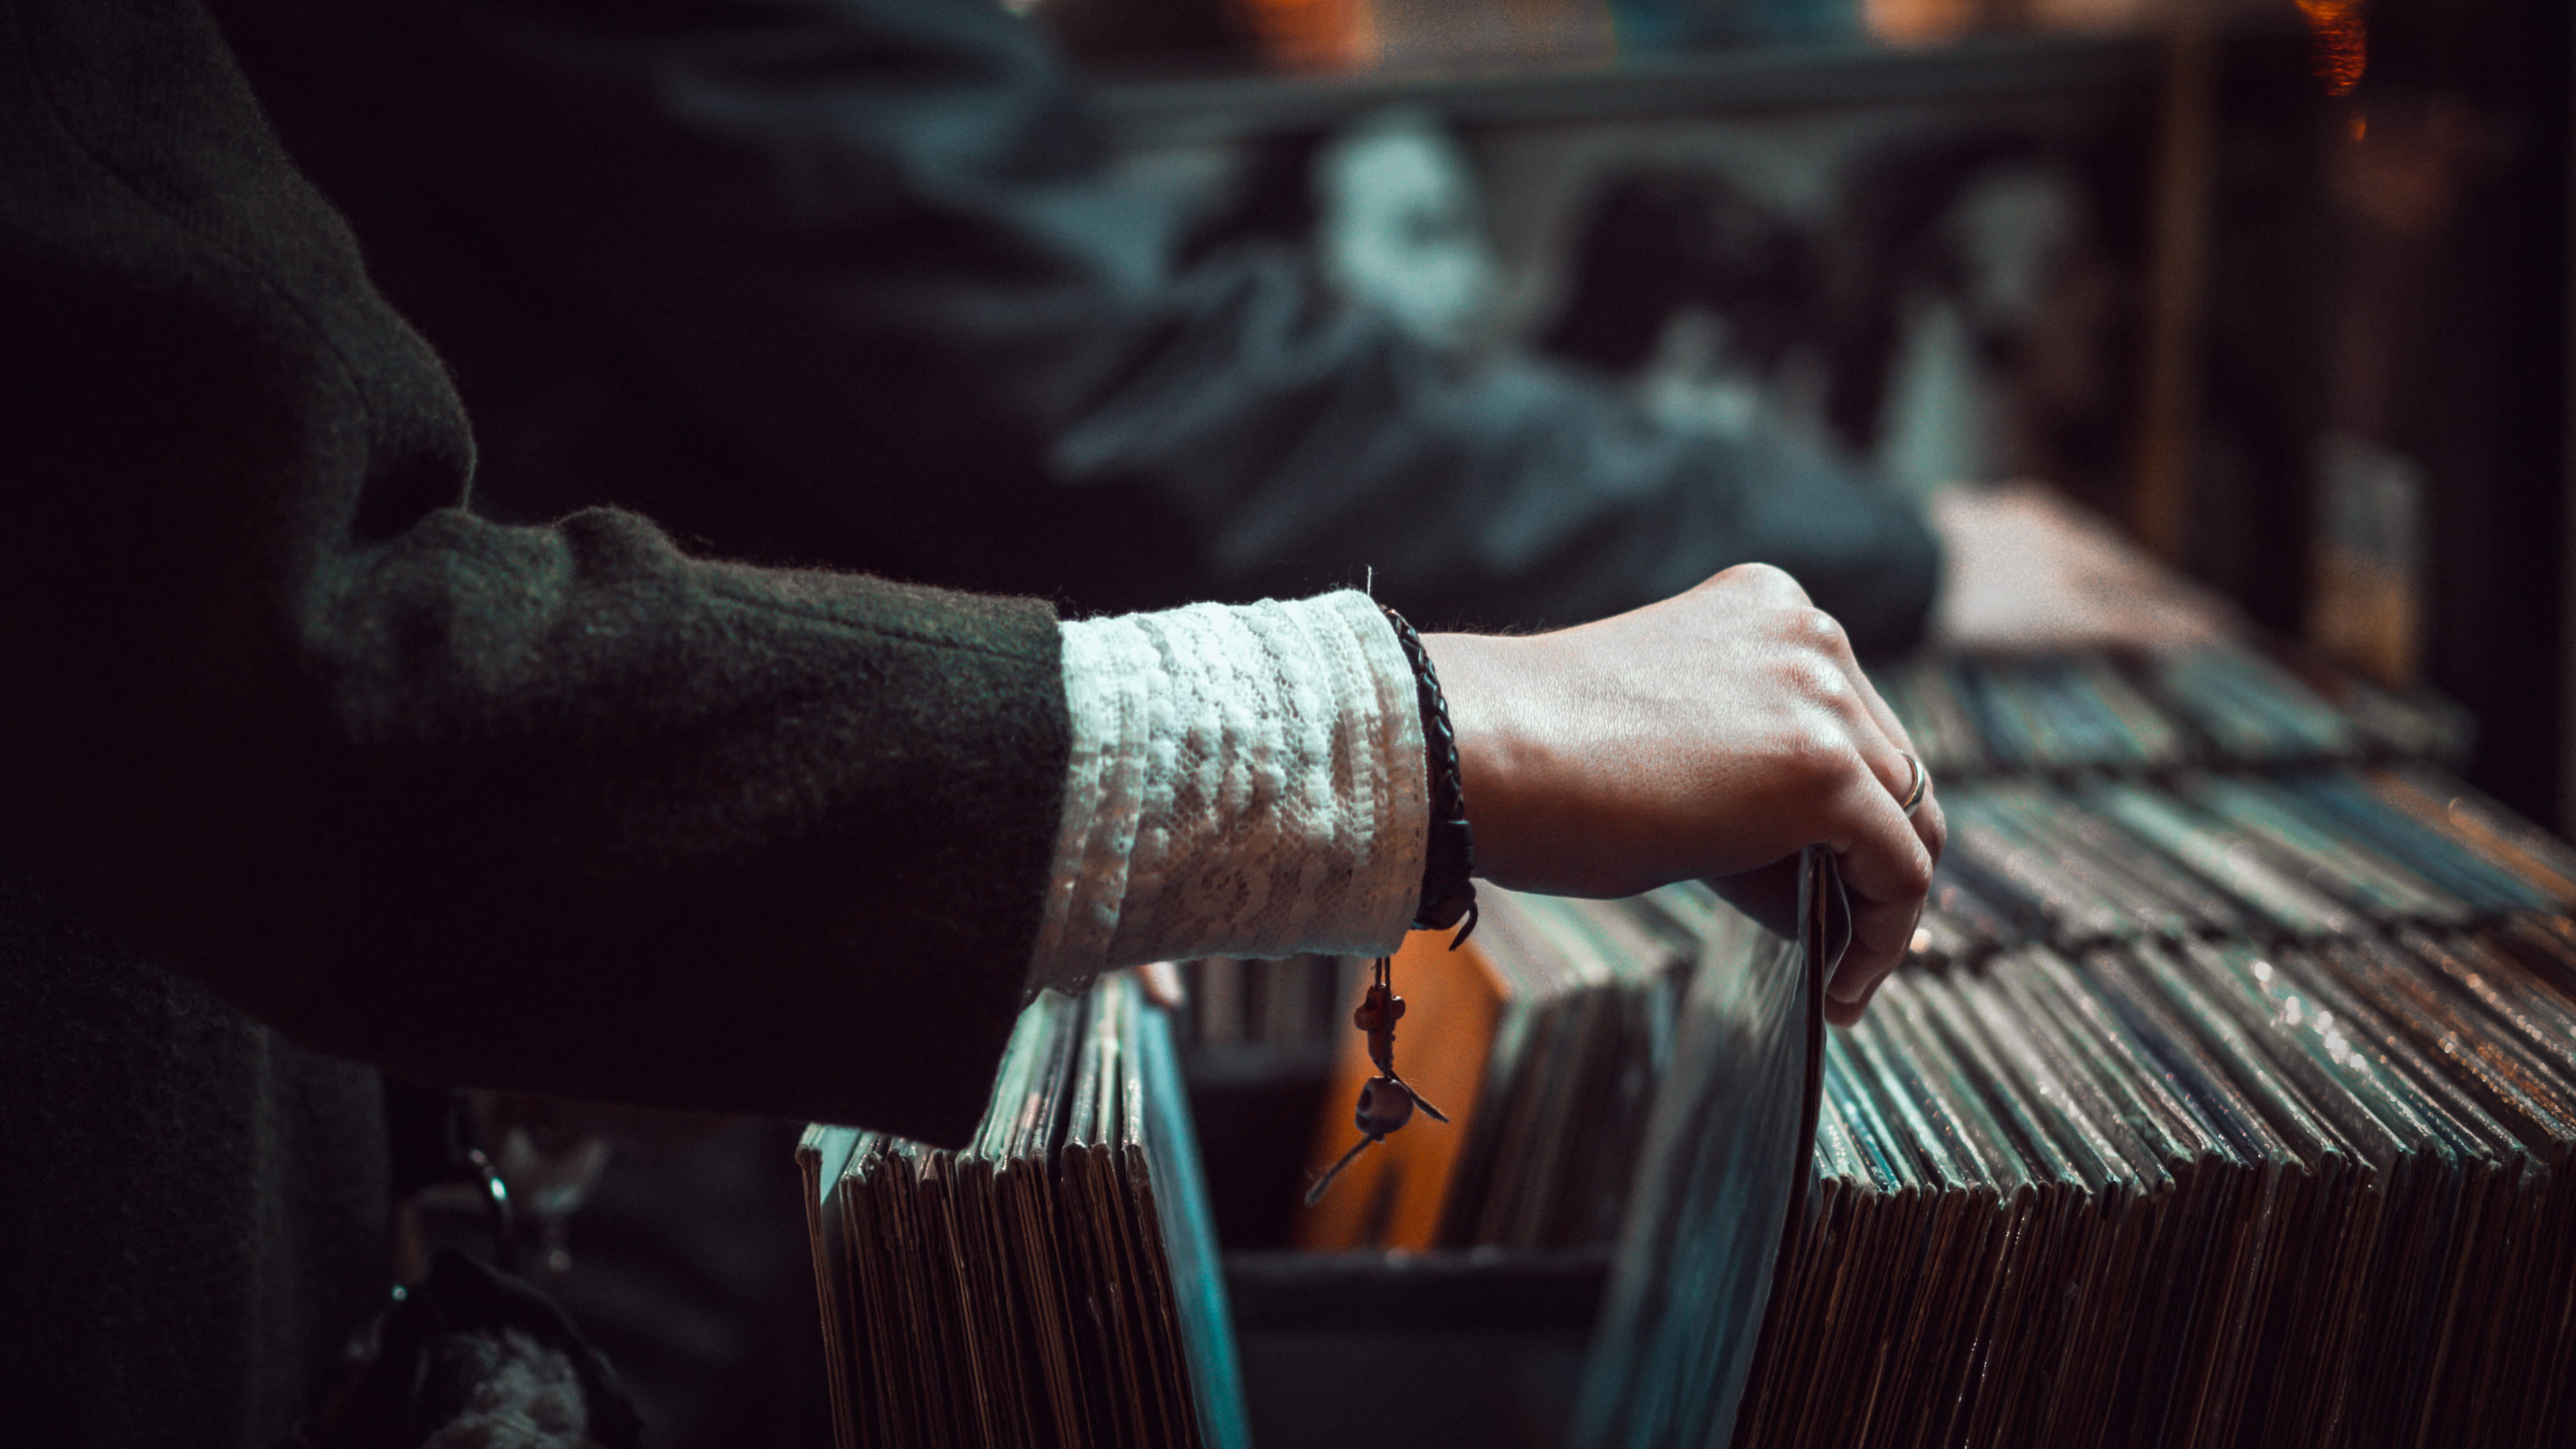 person picking up the music record, hand, vintage, vinyl, lady